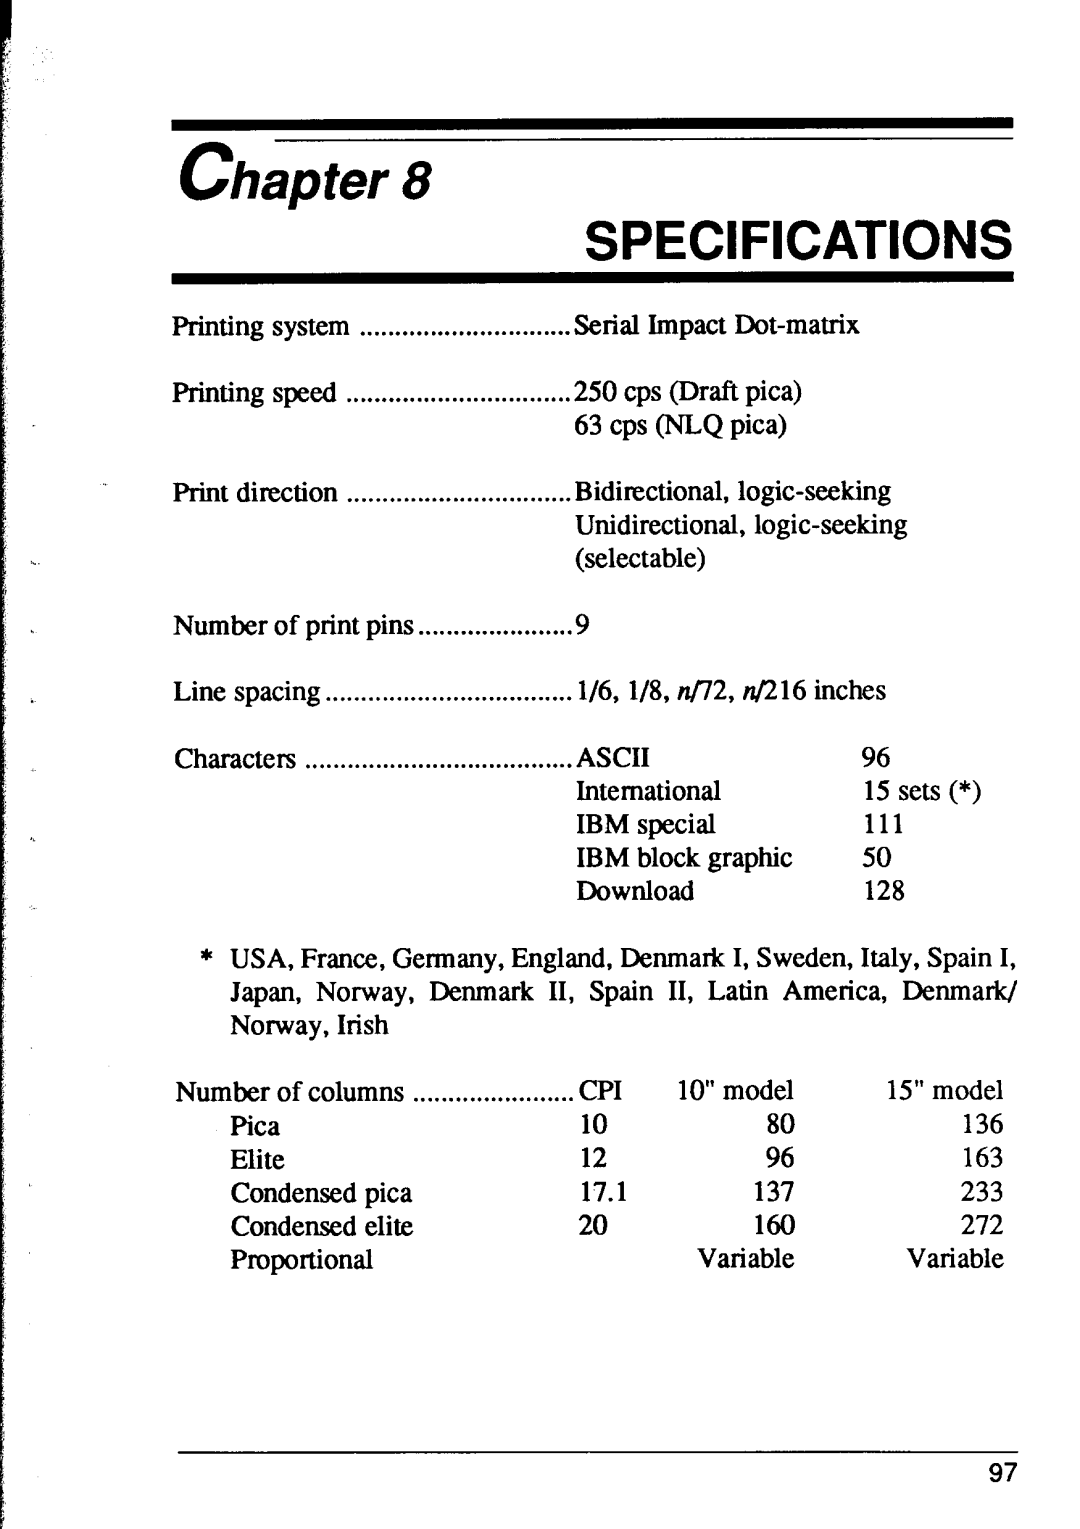 Star Micronics XR-1000, XR-1500 user manual Specifications, chapter 